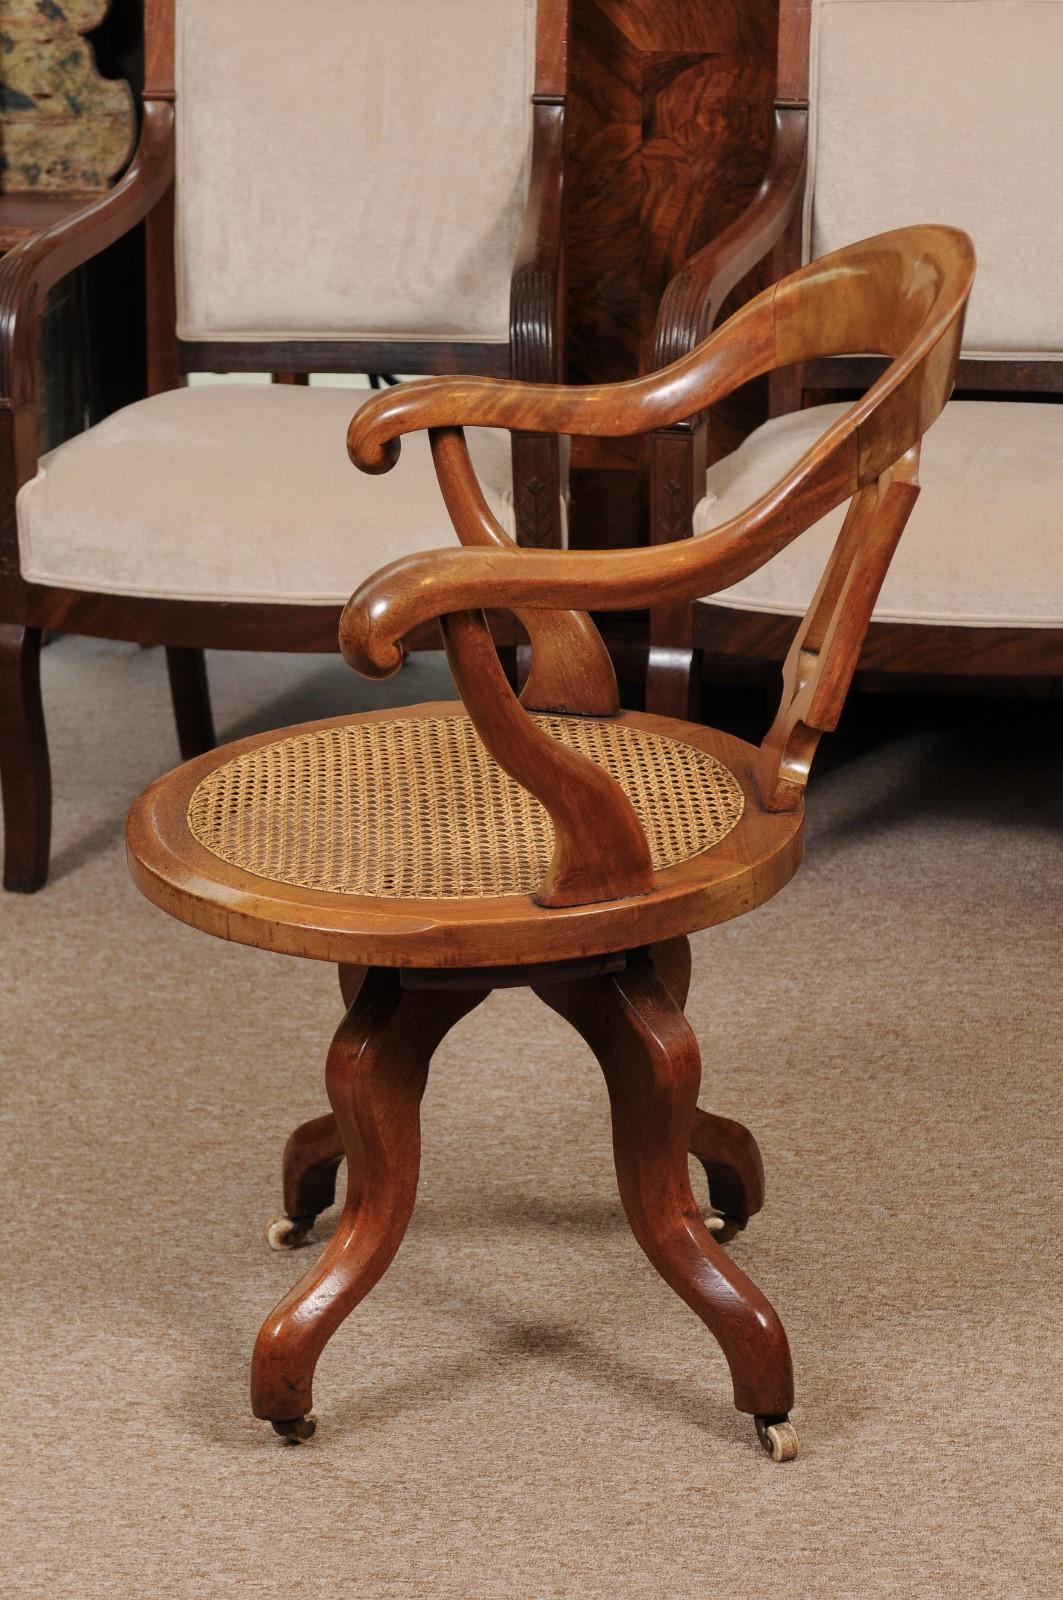 Victorian Walnut Desk Chair with Swivel Caned Seat, England, Late 19th Century For Sale 4